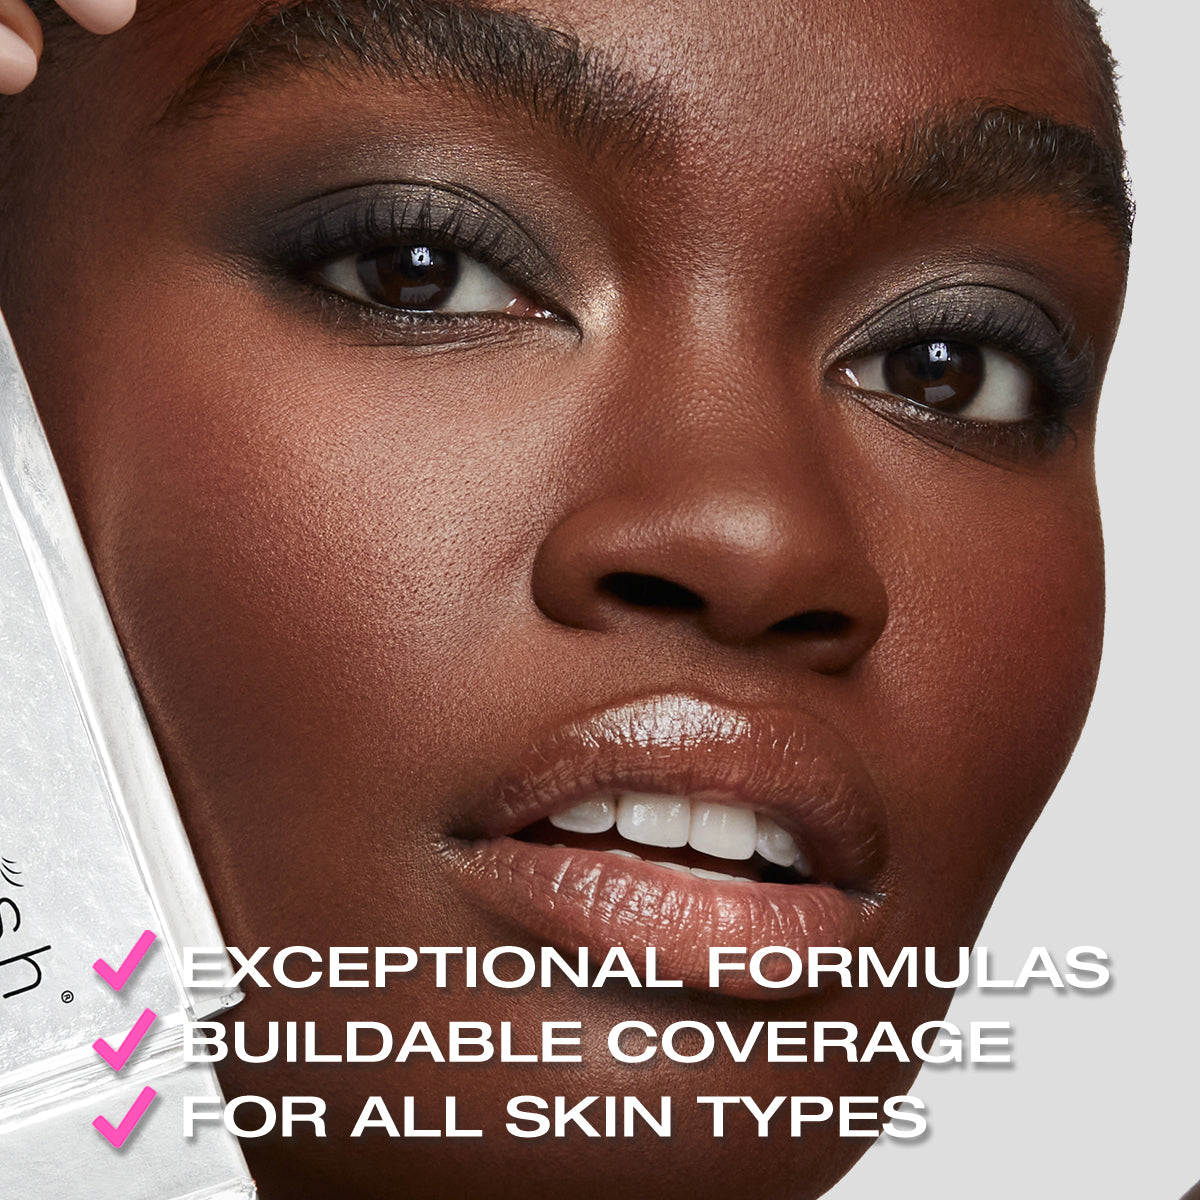 Exceptional formulas, buildable coverage, for all skin types. Close up of model with makeup applied.